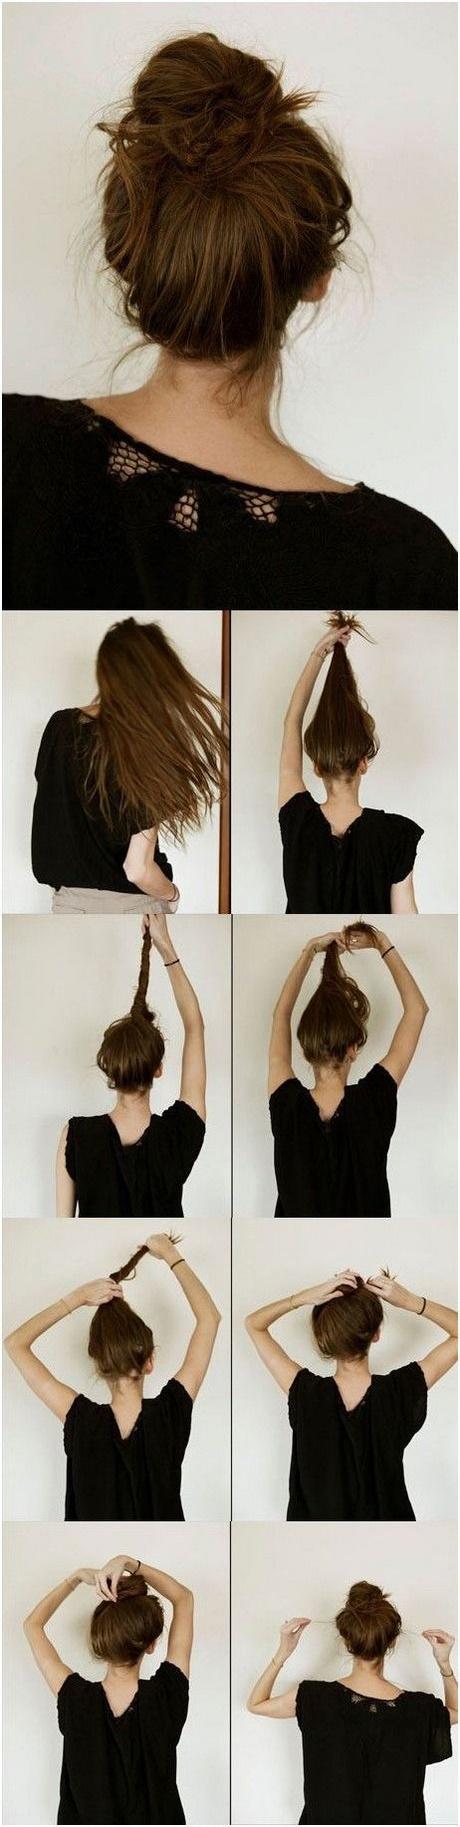 10 easy quick everyday hairstyles 10-easy-quick-everyday-hairstyles-88_4